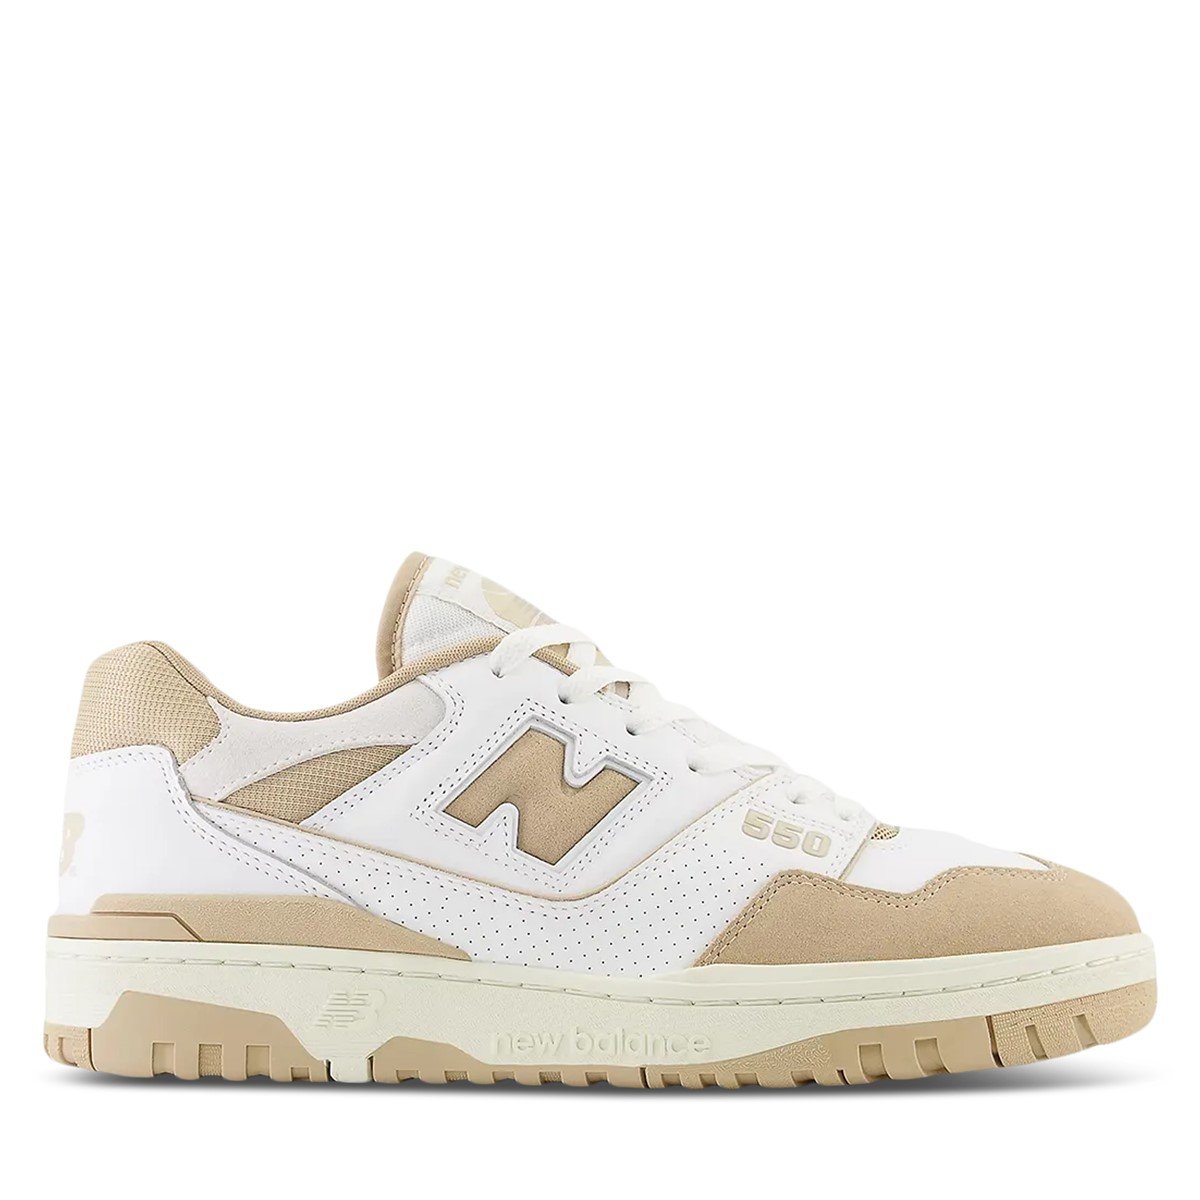 BB550 Sneakers in White/Brown